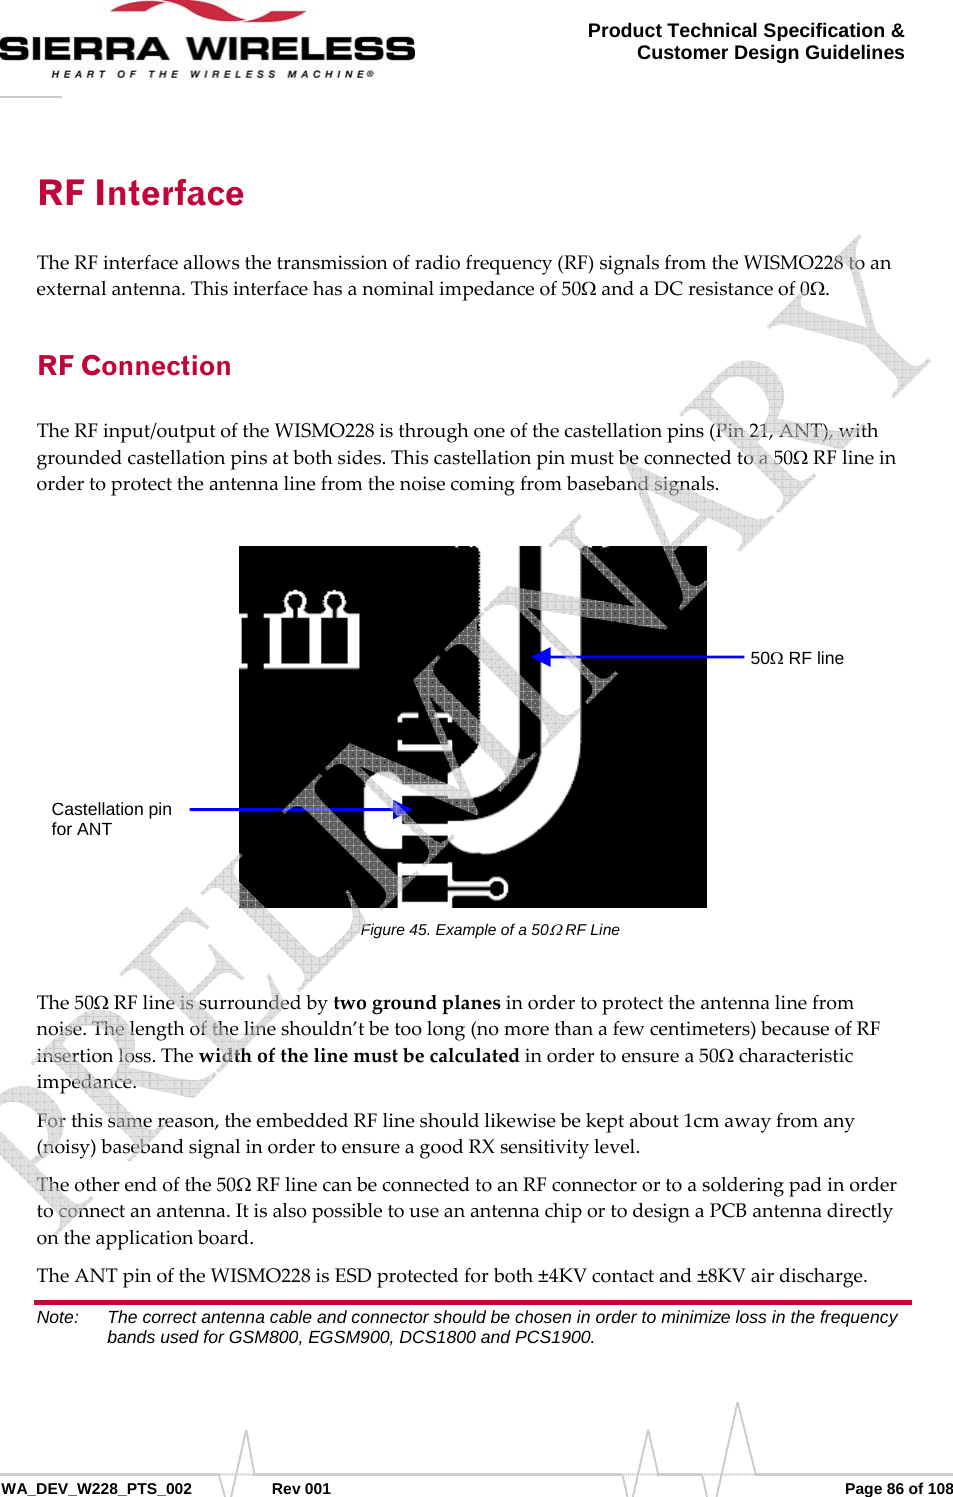      WA_DEV_W228_PTS_002 Rev 001  Page 86 of 108 Product Technical Specification &amp; Customer Design Guidelines RF Interface TheRFinterfaceallowsthetransmissionofradiofrequency(RF)signalsfromtheWISMO228toanexternalantenna.Thisinterfacehasanominalimpedanceof50ΩandaDCresistanceof0Ω.RF Connection TheRFinput/outputoftheWISMO228isthroughoneofthecastellationpins(Pin21,ANT),withgroundedcastellationpinsatbothsides.Thiscastellationpinmustbeconnectedtoa50ΩRFlineinordertoprotecttheantennalinefromthenoisecomingfrombasebandsignals.Figure 45. Example of a 50Ω RF Line The50ΩRFlineissurroundedbytwogroundplanesinordertoprotecttheantennalinefromnoise.Thelengthofthelineshouldn’tbetoolong(nomorethanafewcentimeters)becauseofRFinsertionloss.Thewidthofthelinemustbecalculatedinordertoensurea50Ωcharacteristicimpedance.Forthissamereason,theembeddedRFlineshouldlikewisebekeptabout1cmawayfromany(noisy)basebandsignalinordertoensureagoodRXsensitivitylevel.Theotherendofthe50ΩRFlinecanbeconnectedtoanRFconnectorortoasolderingpadinordertoconnectanantenna.ItisalsopossibletouseanantennachiportodesignaPCBantennadirectlyontheapplicationboard.TheANTpinoftheWISMO228isESDprotectedforboth±4KVcontactand±8KVairdischarge.Note:   The correct antenna cable and connector should be chosen in order to minimize loss in the frequency bands used for GSM800, EGSM900, DCS1800 and PCS1900.  Castellation pin for ANT 50Ω RF line     